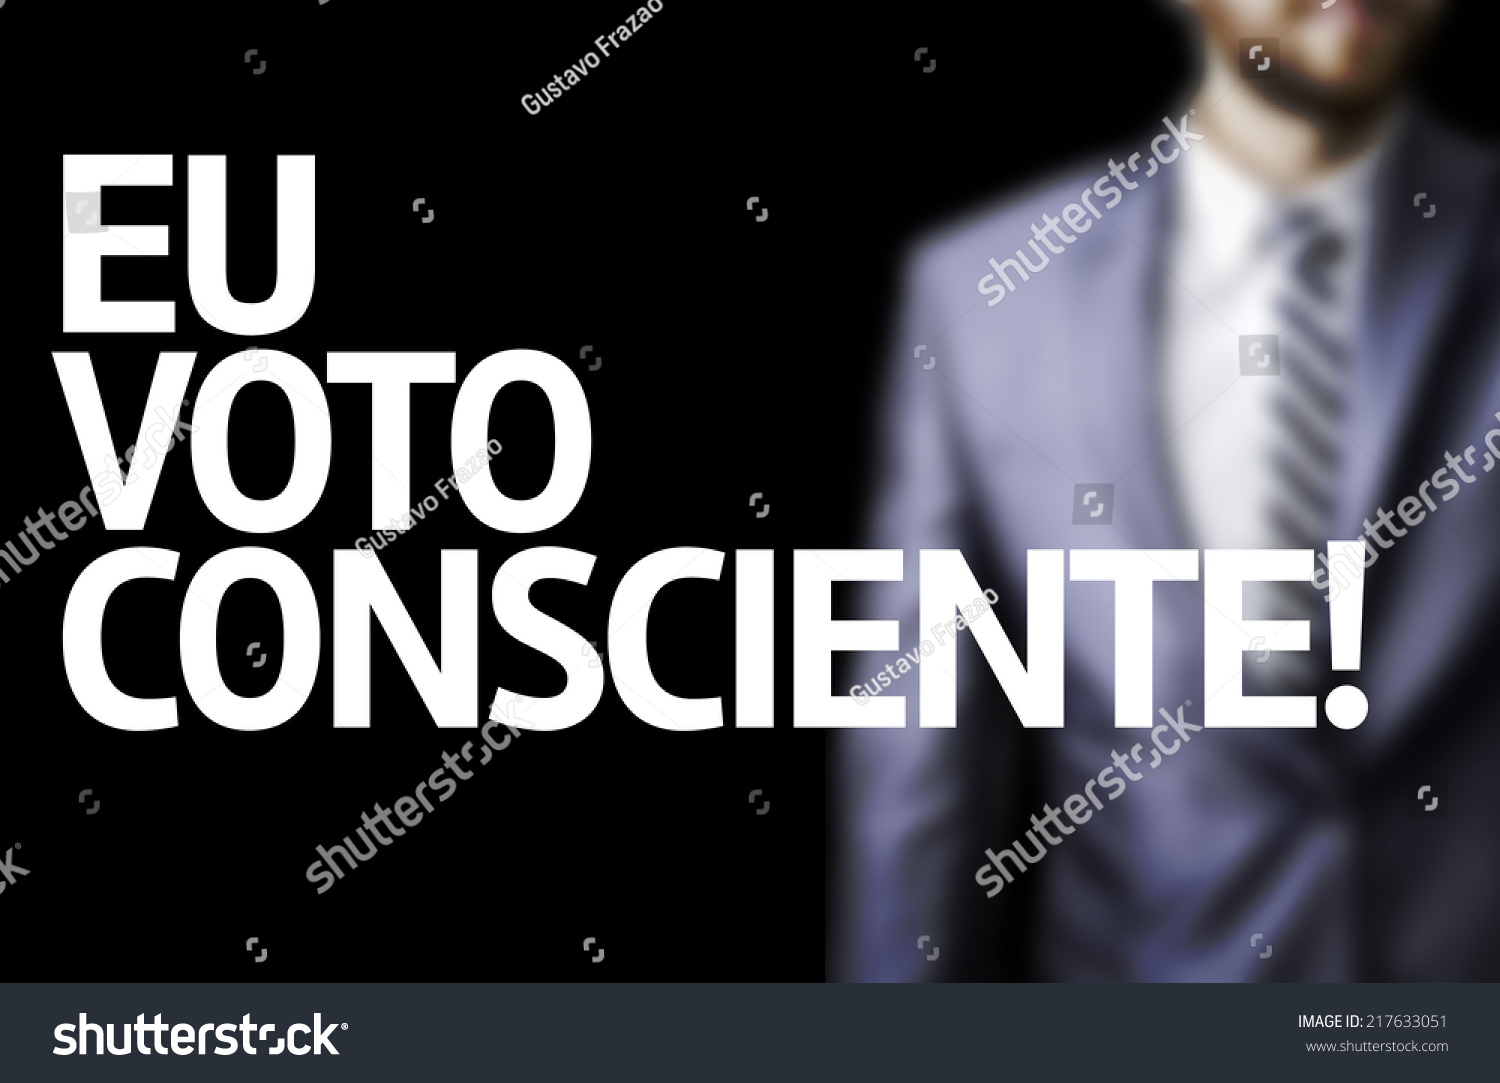 I Vote Conscientiously (In Portuguese) written on a board with a business man on background #217633051